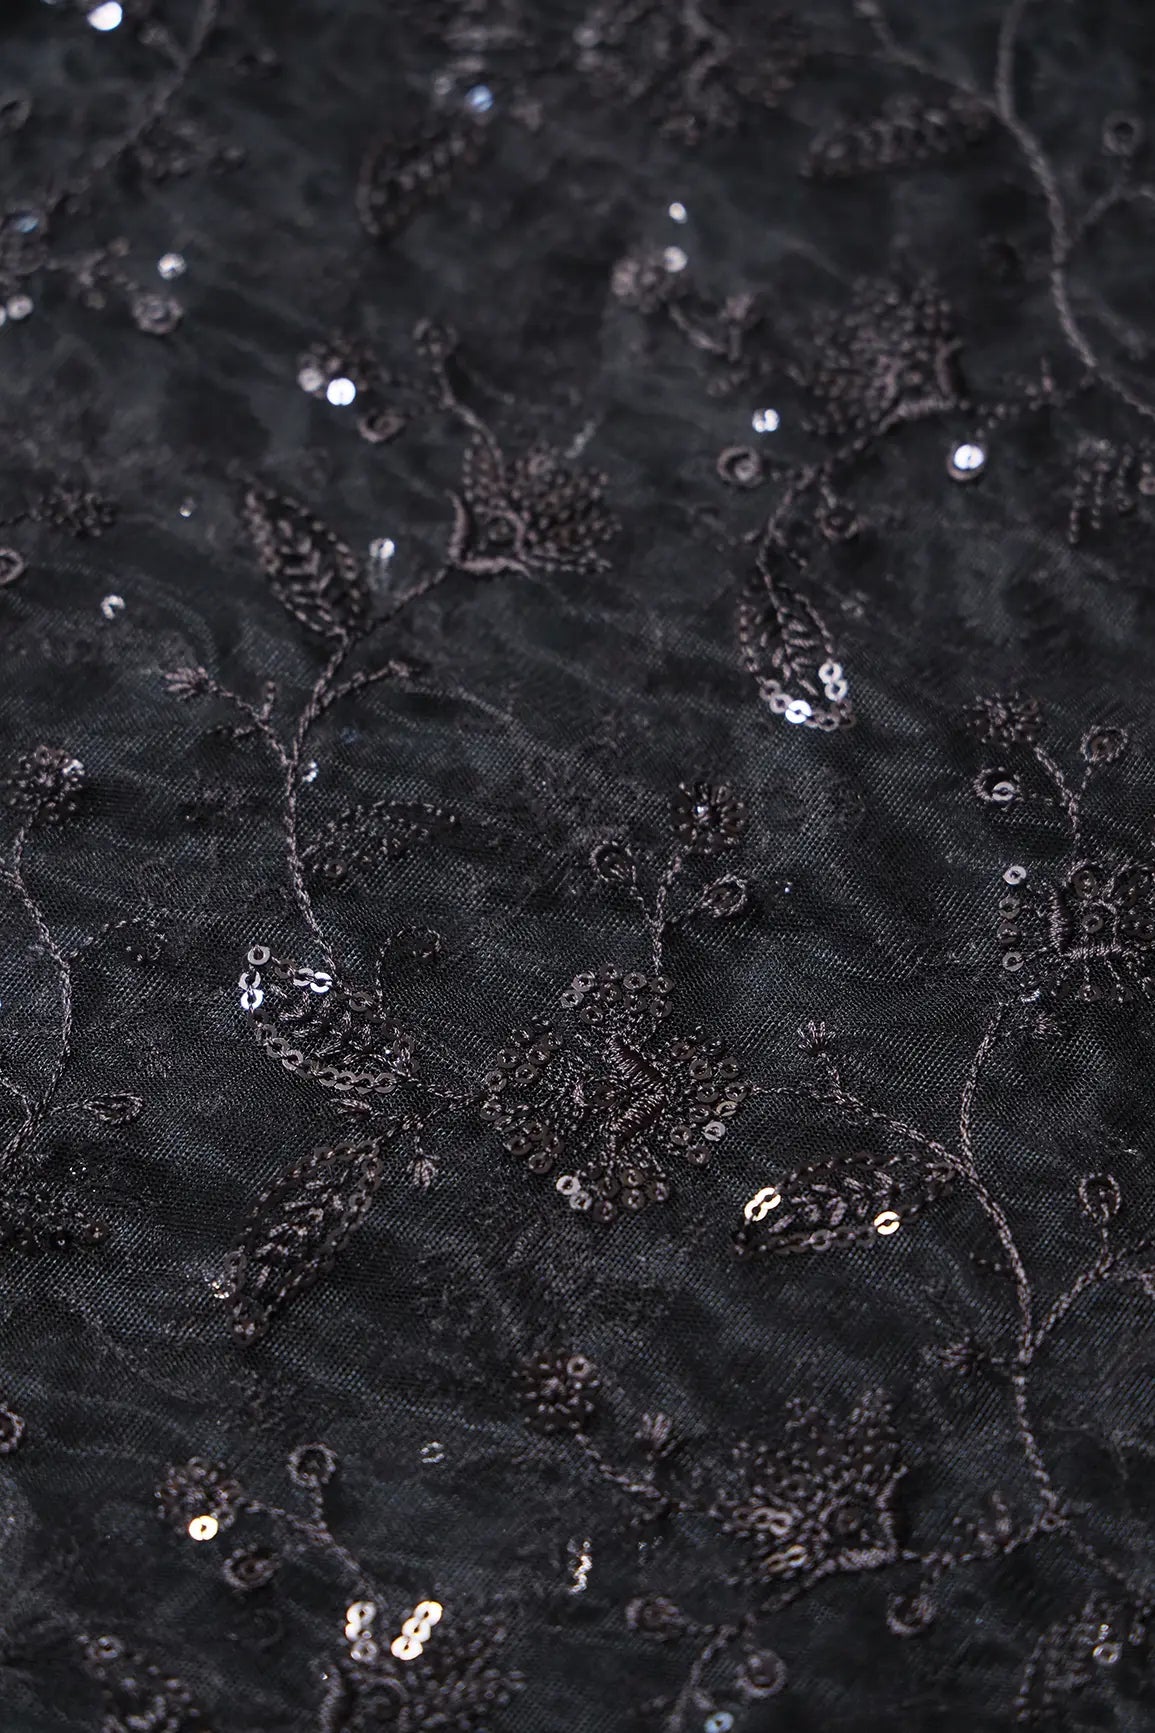 Black Thread With Black Sequins Floral Embroidery On Black Soft Net Fabric - doeraa